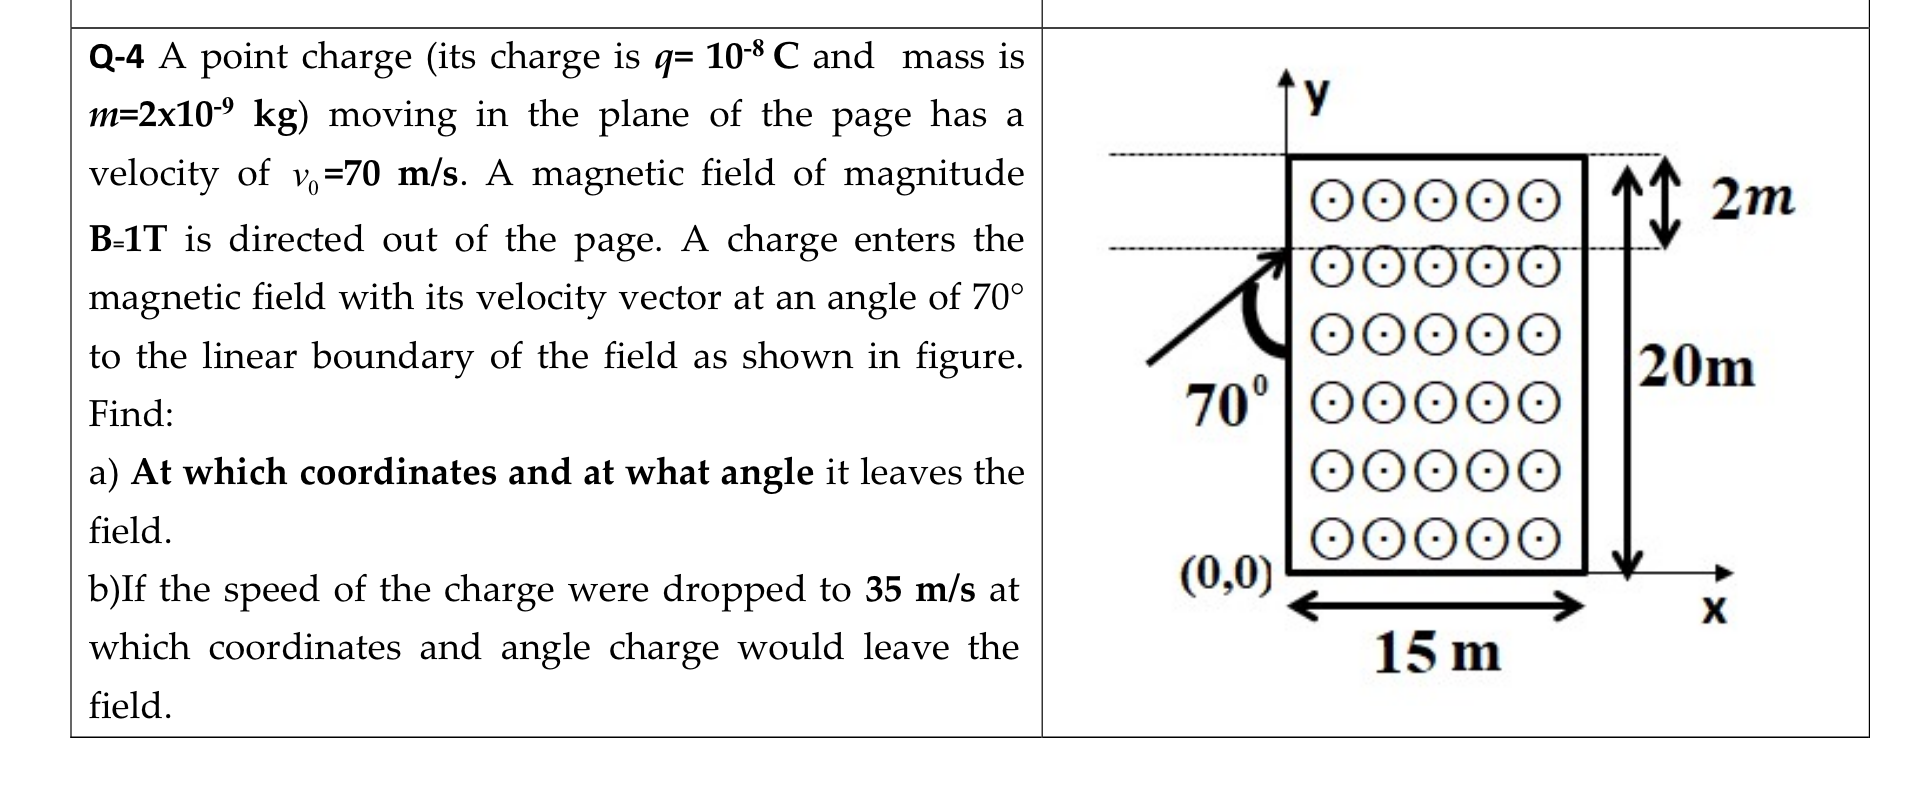 Q-4 A point charge (its charge is q= 10-8 C and mass is
m=2x10-9 kg) moving in the plane of the page has a
velocity of v=70 m/s. A magnetic field of magnitude
B-1T is directed out of the page. A charge enters the
magnetic field with its velocity vector at an angle of 70°
to the linear boundary of the field as shown in figure.
Find:
a) At which coordinates and at what angle it leaves the
field.
b)If the speed of the charge were dropped to 35 m/s at
which coordinates and angle charge would leave the
field.
